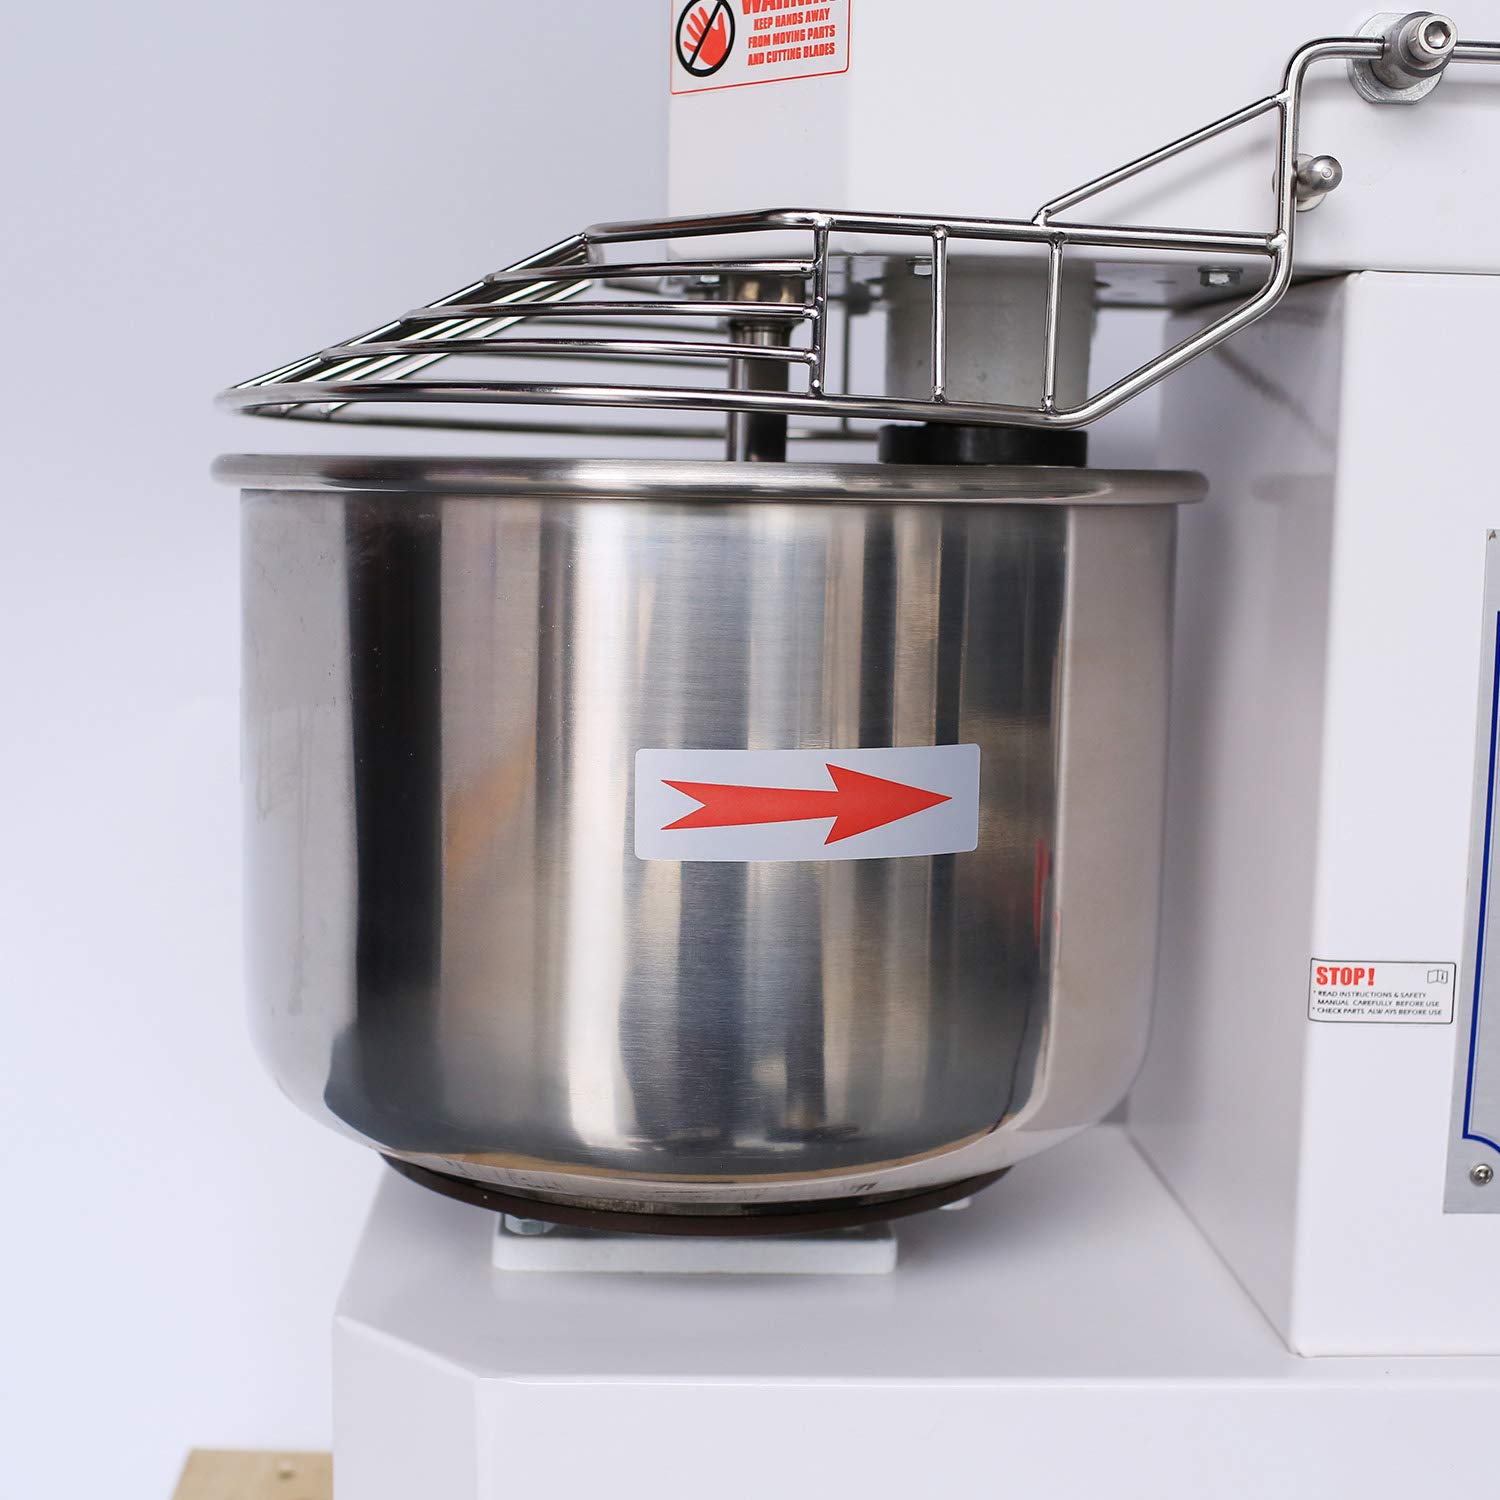 Hakka Commercial Dough Mixer, 40 Qt Spiral Mixer Food Mixer Machine with Food-grade Stainless Steel Bowl, Security Shield & Timer